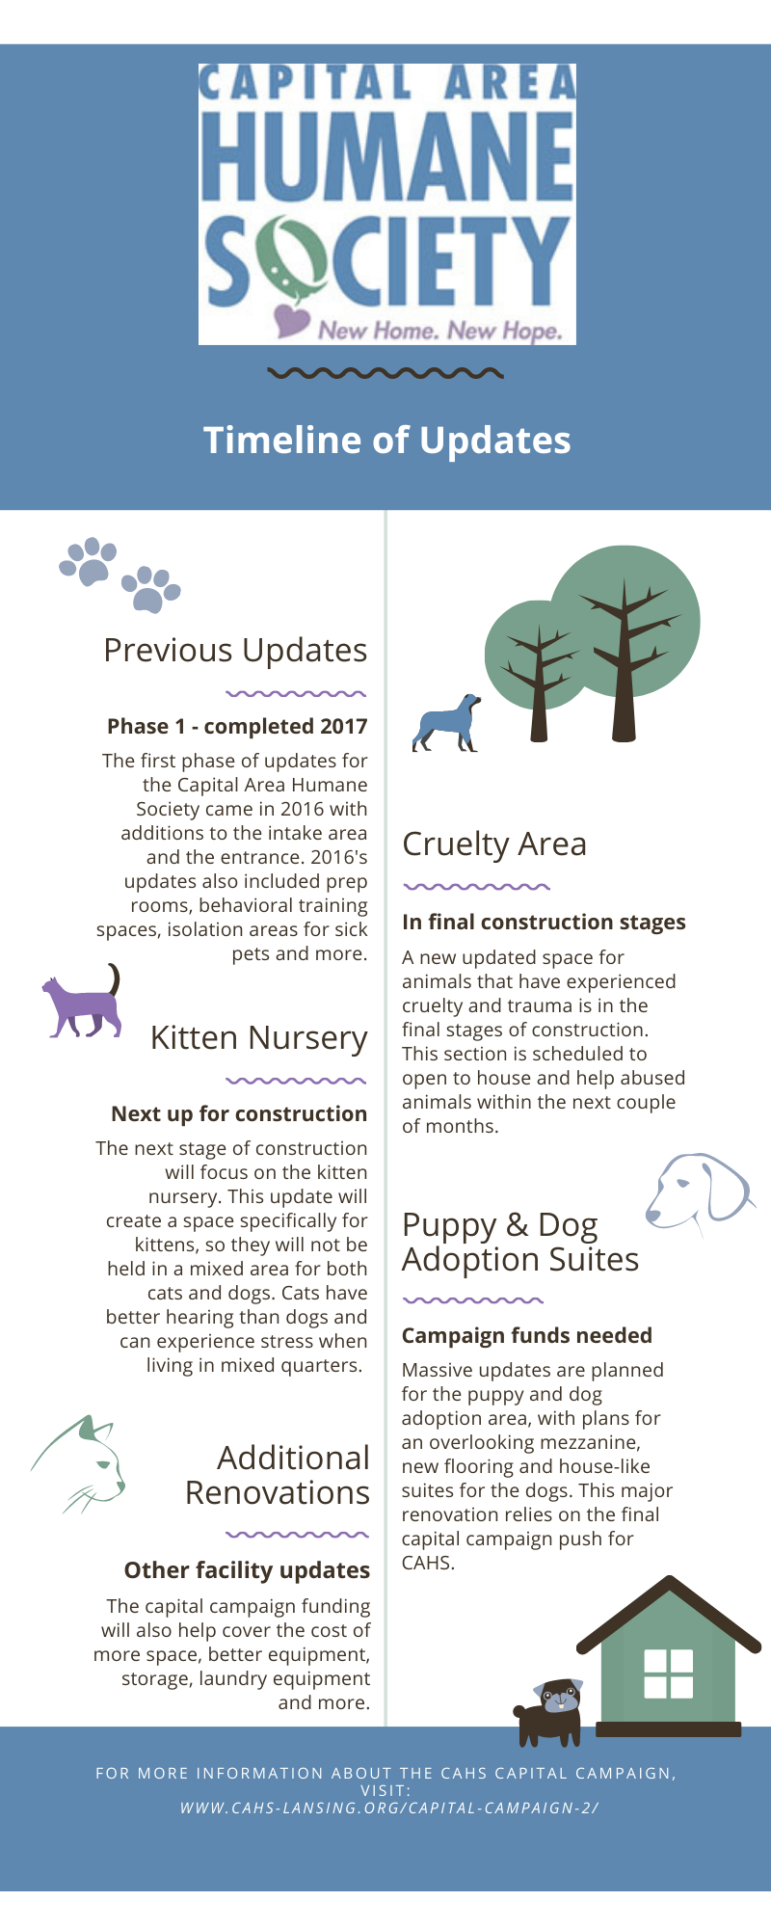 Infographic Timeline for Capital Area Humane Society Updates